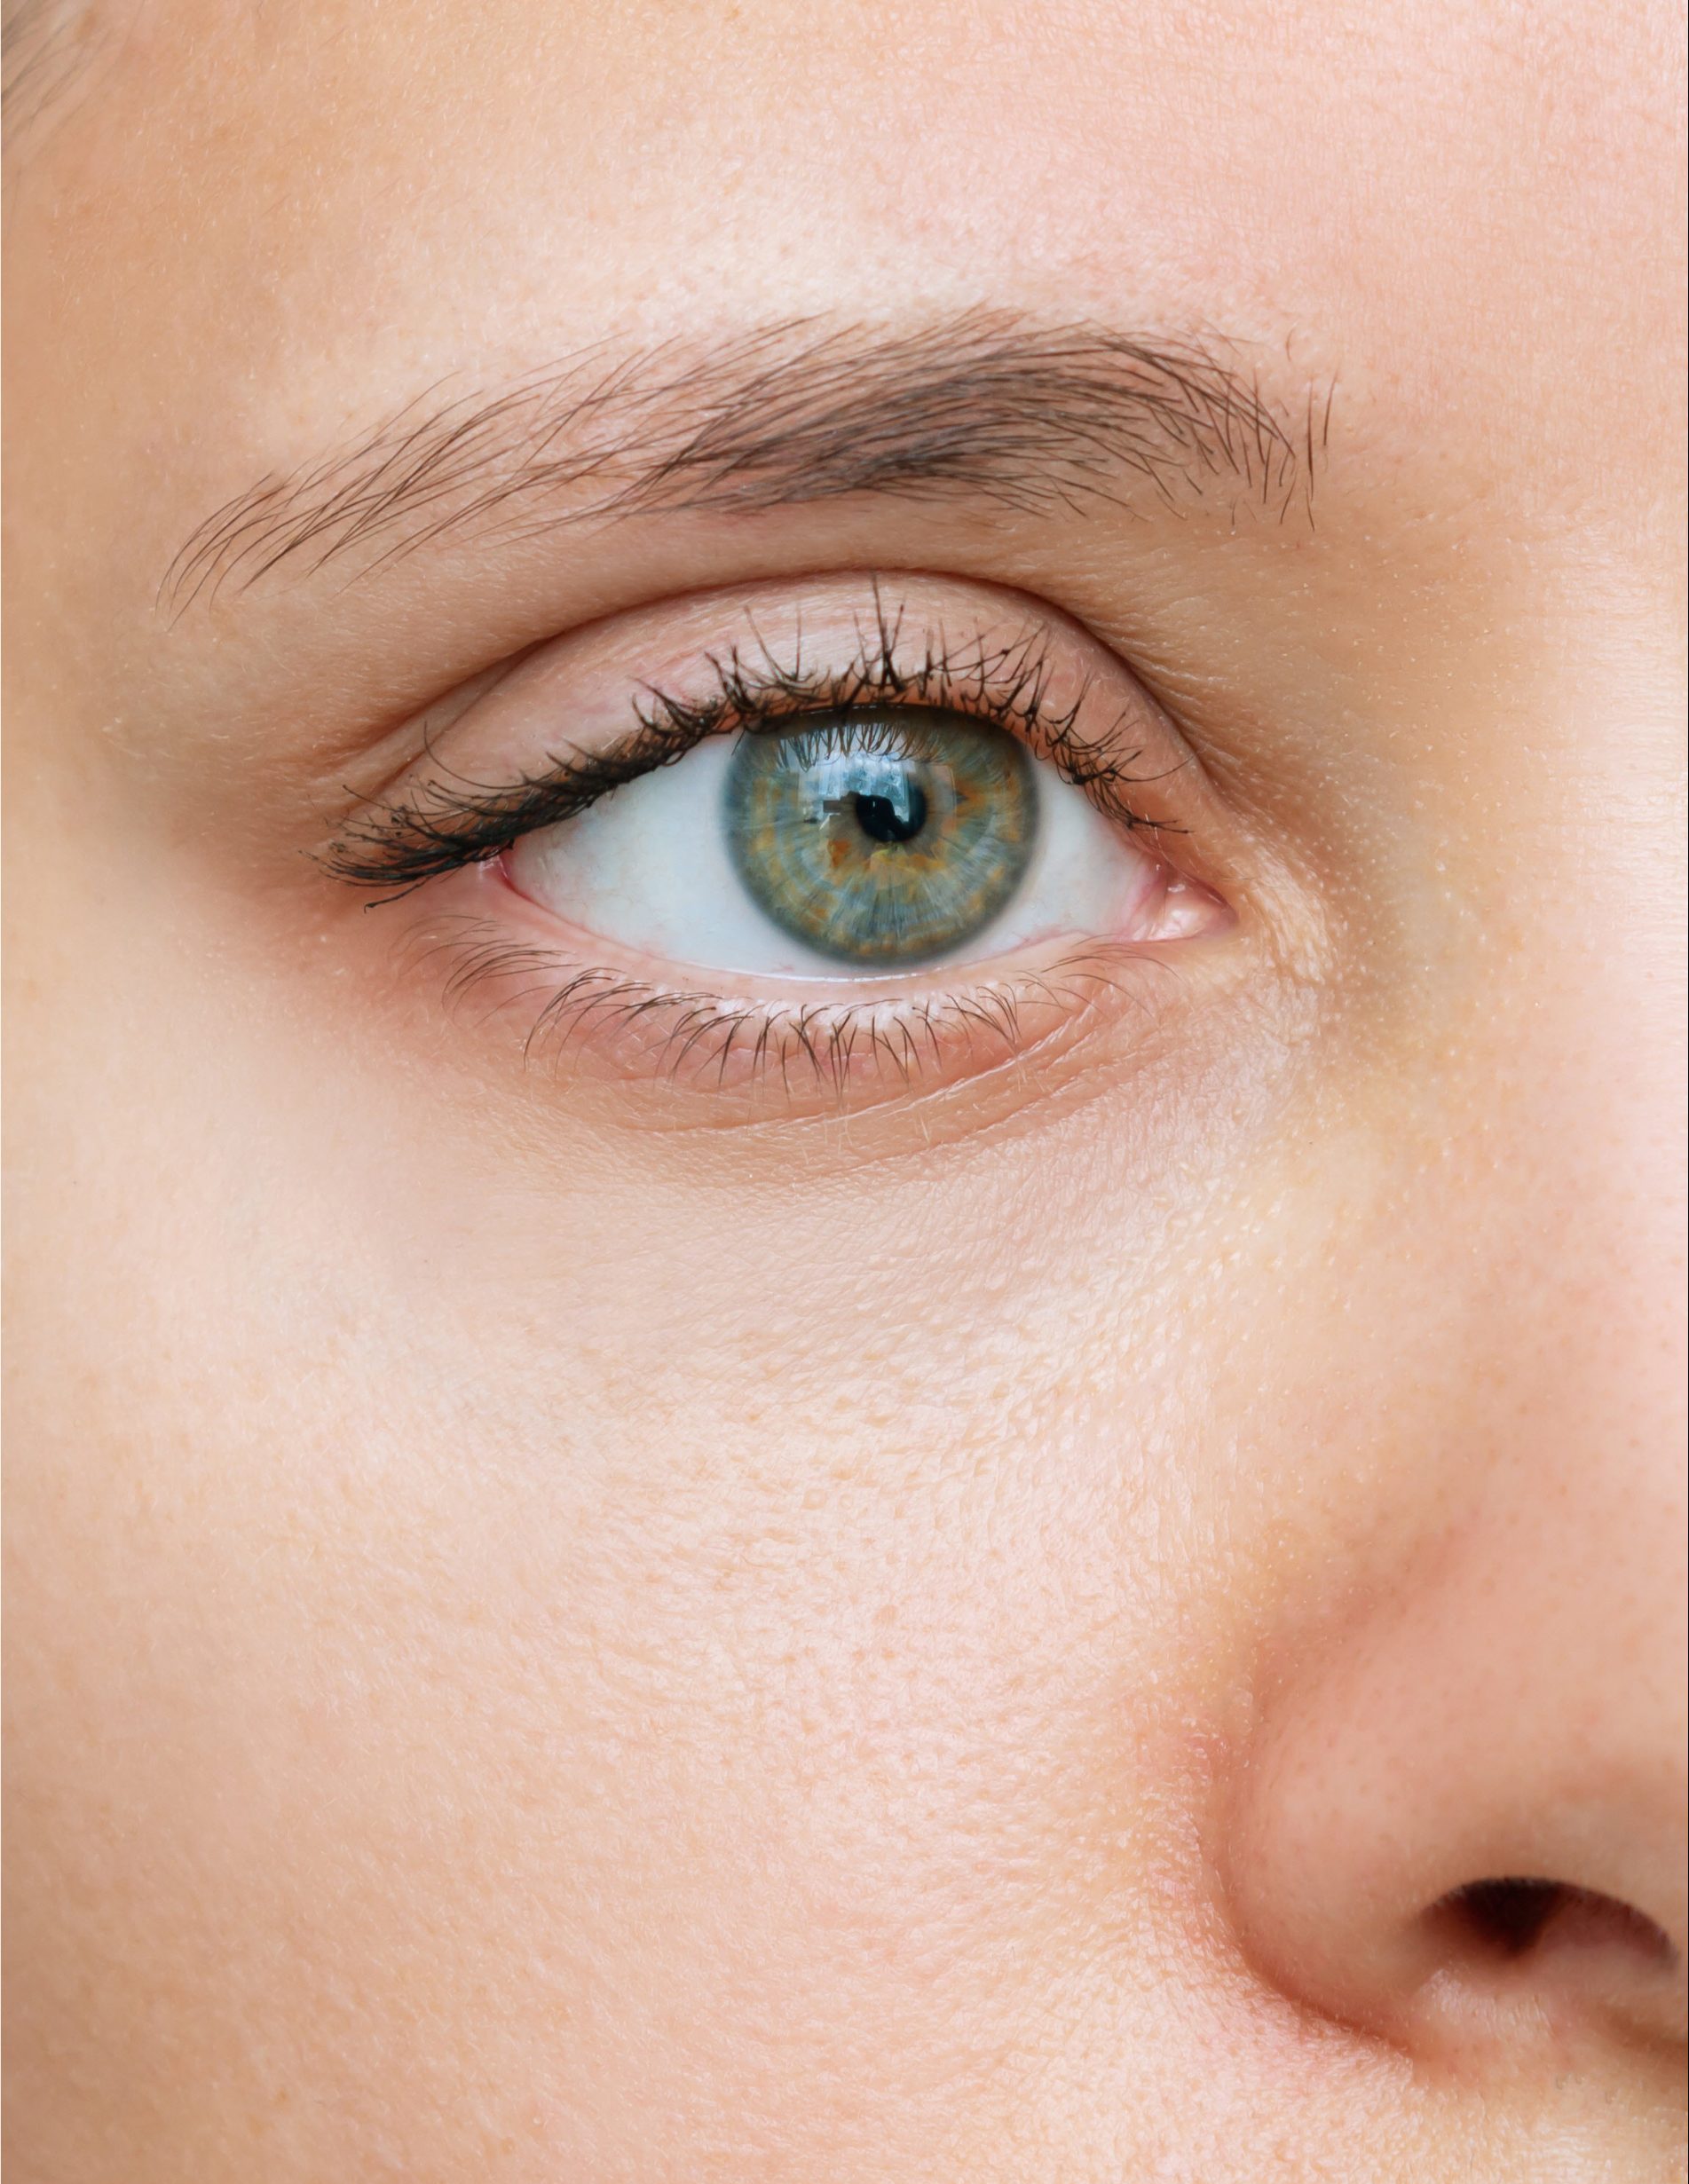 Eyelid After Treatment